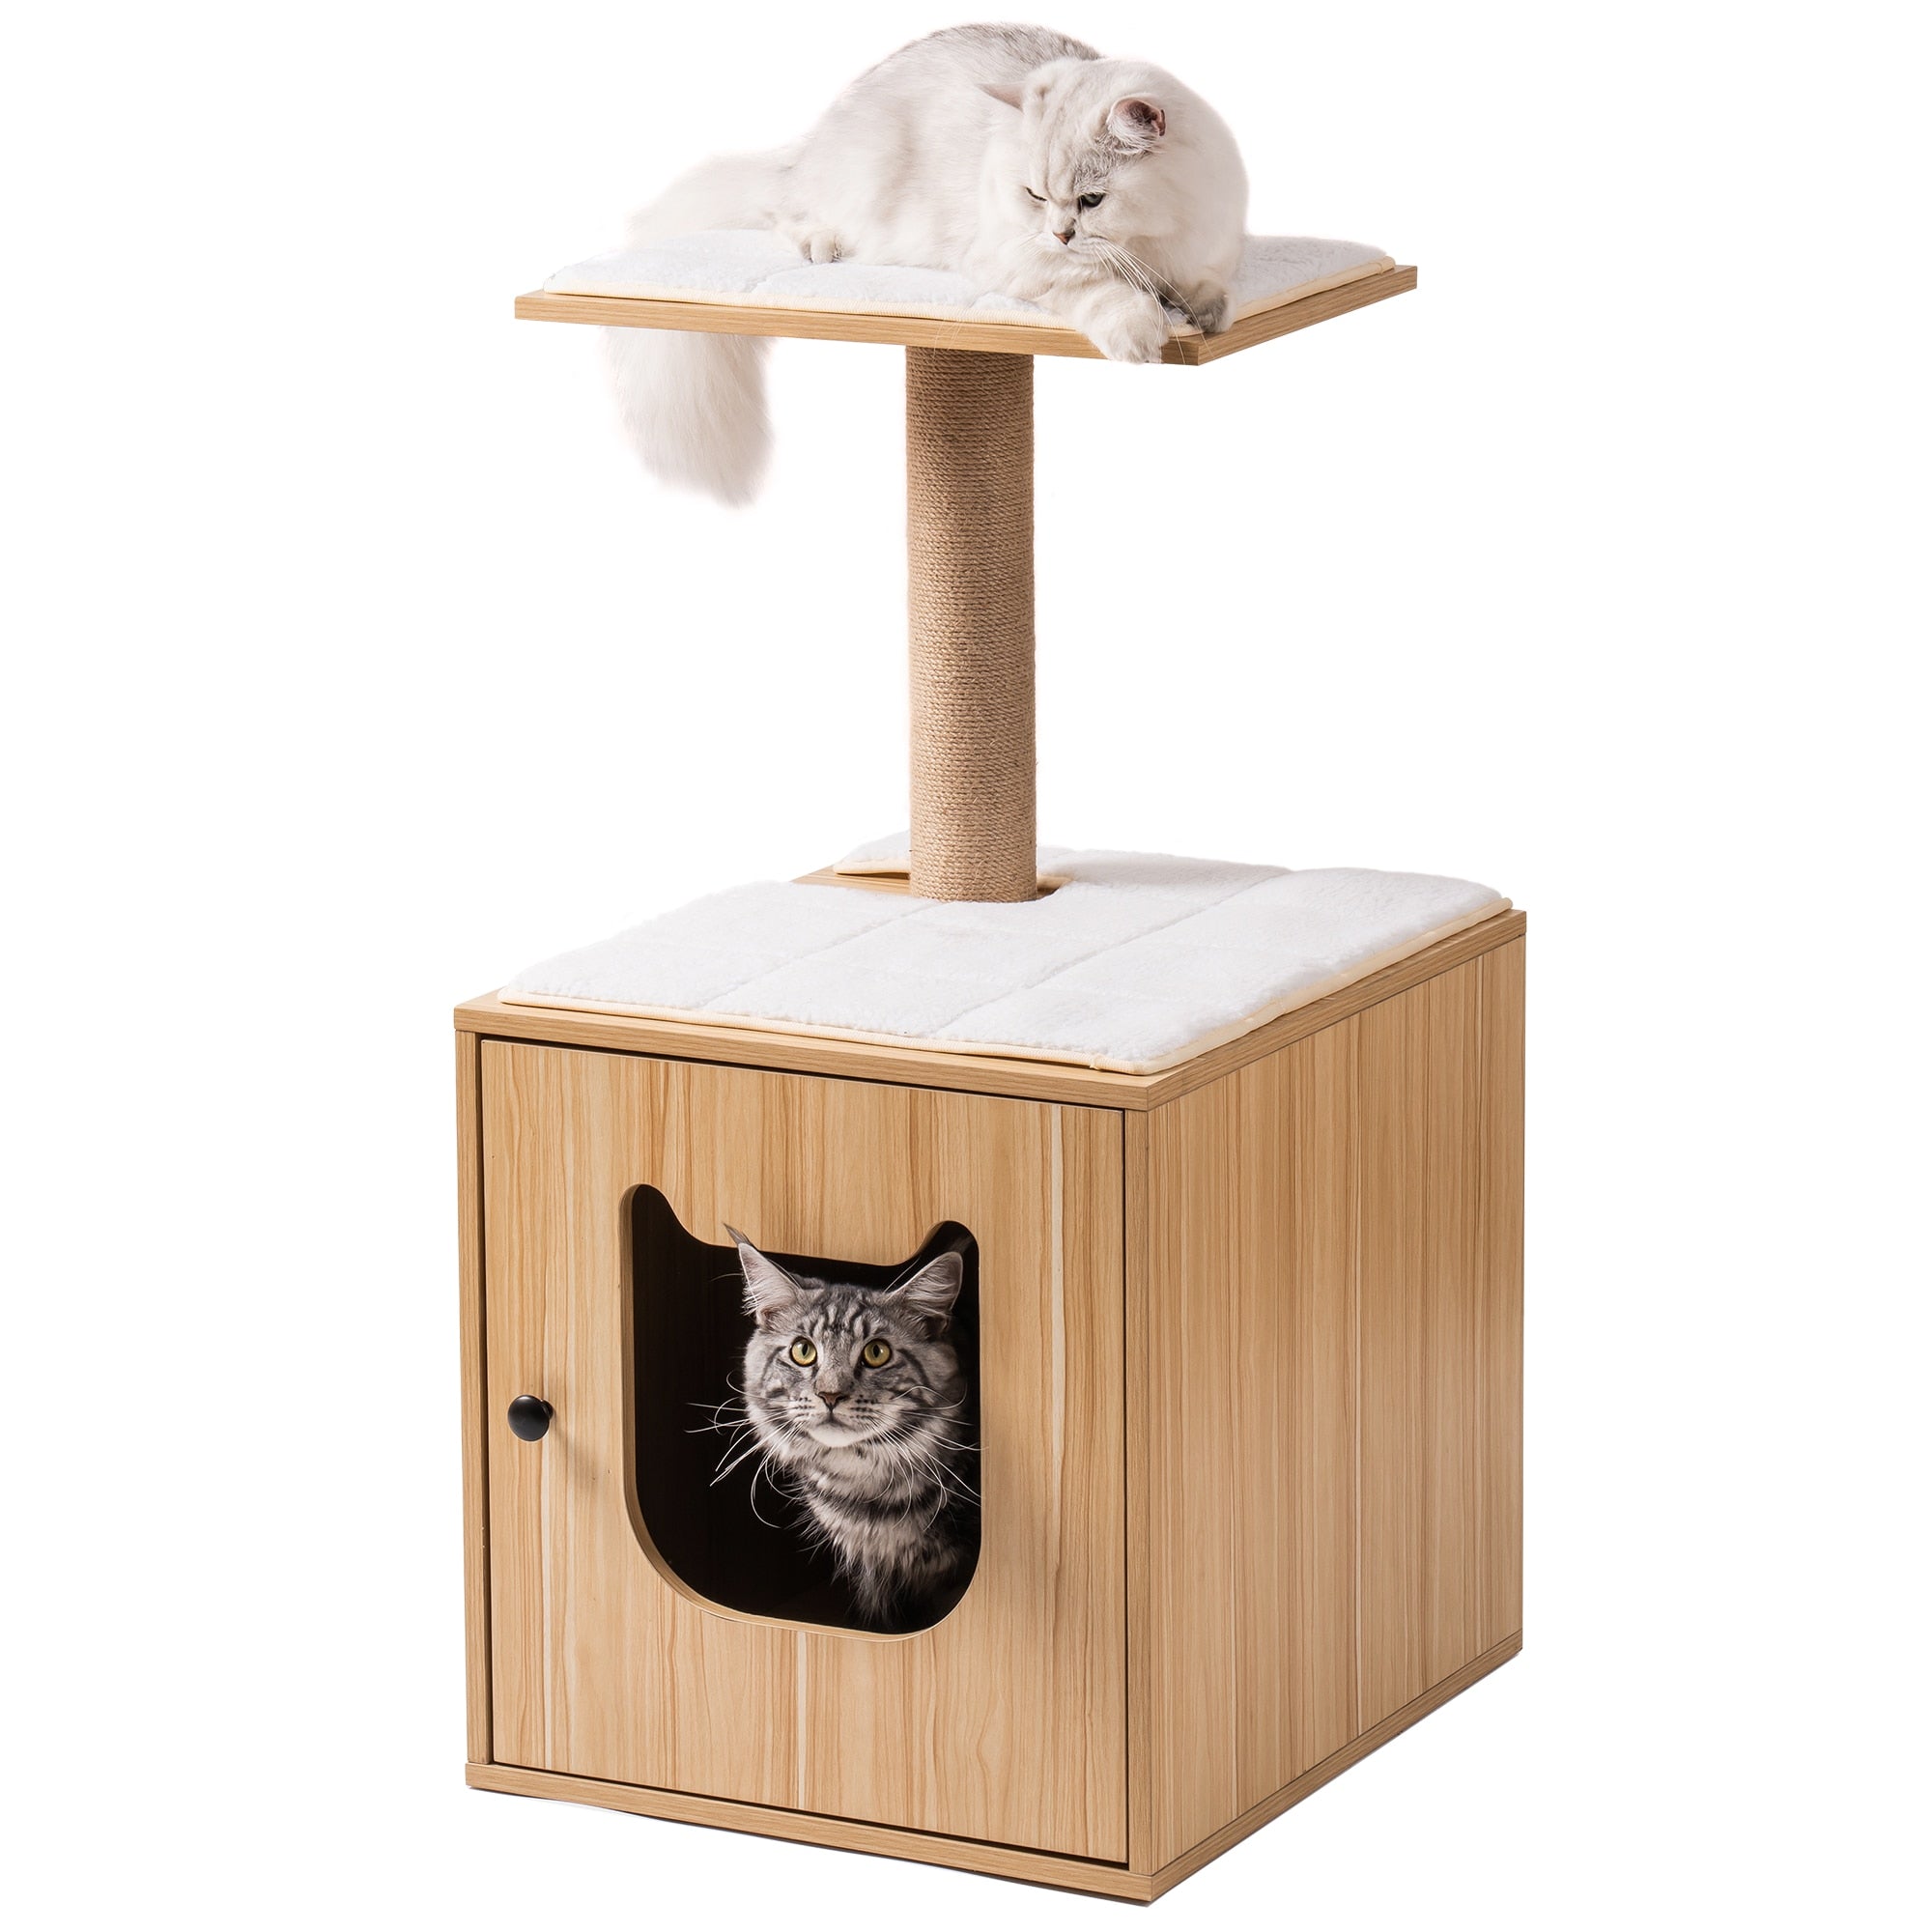 Wooden Cat House with bed